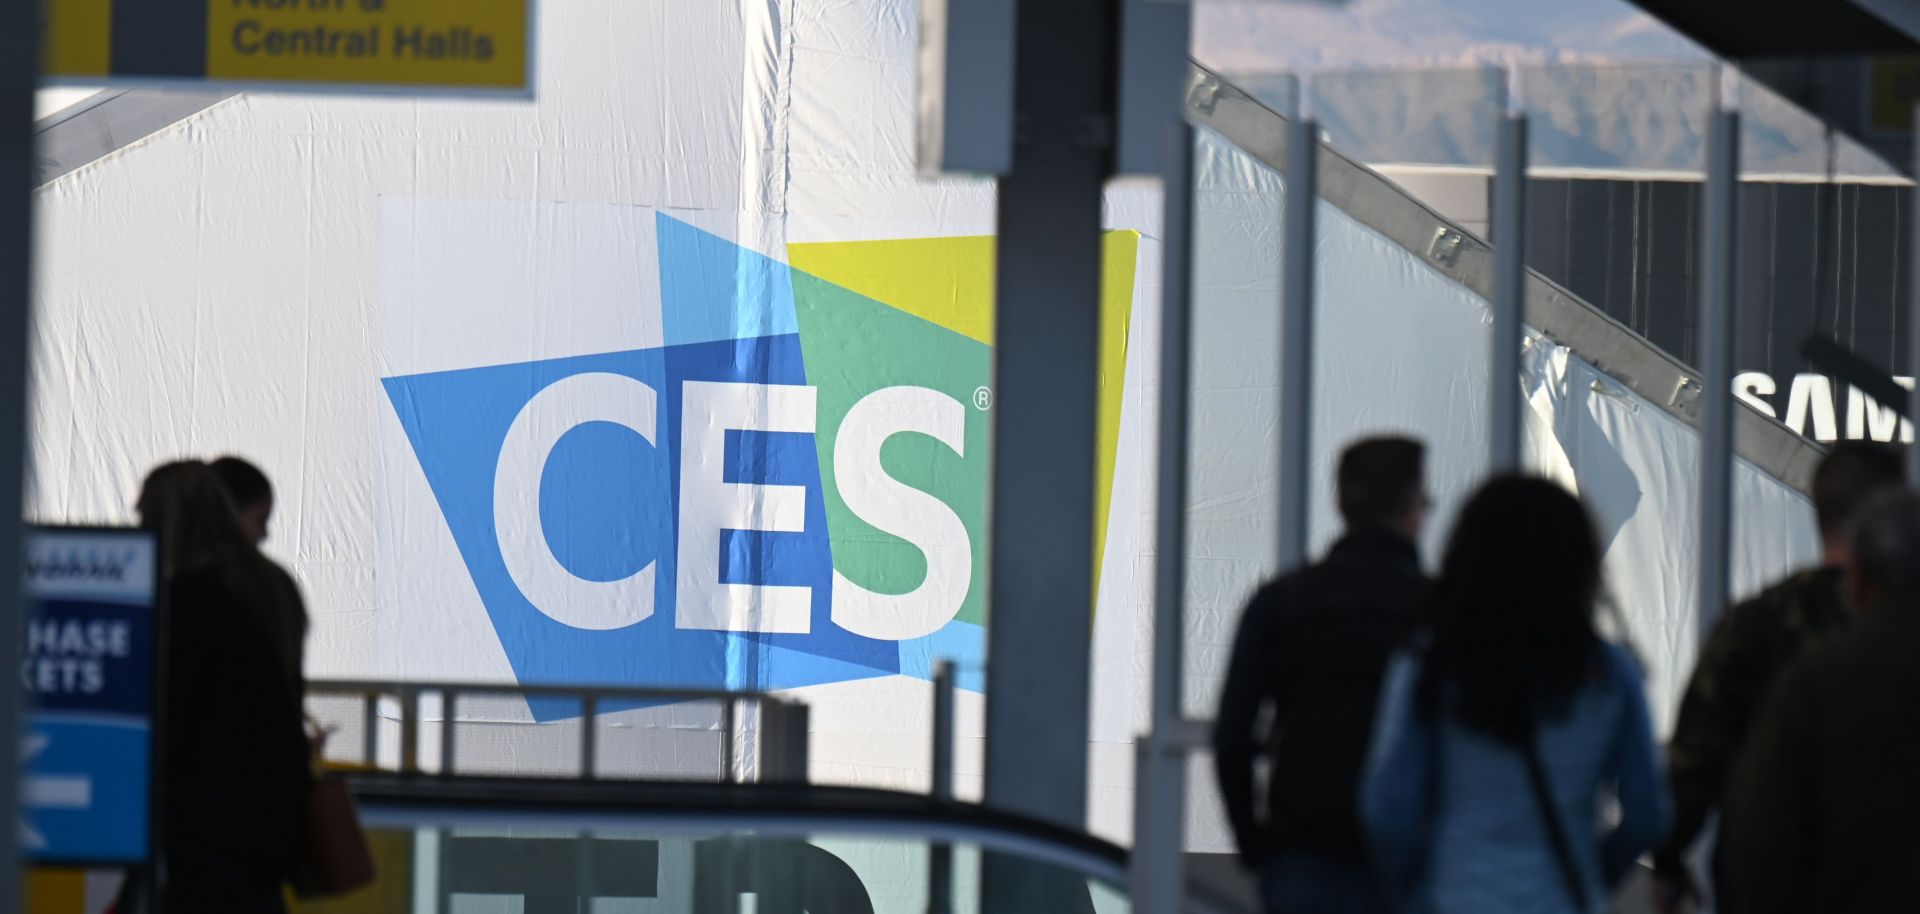 Attendees arrive on Jan. 6 at the Las Vegas Convention Center, where preparation is underway for the CES 2019 technology show.